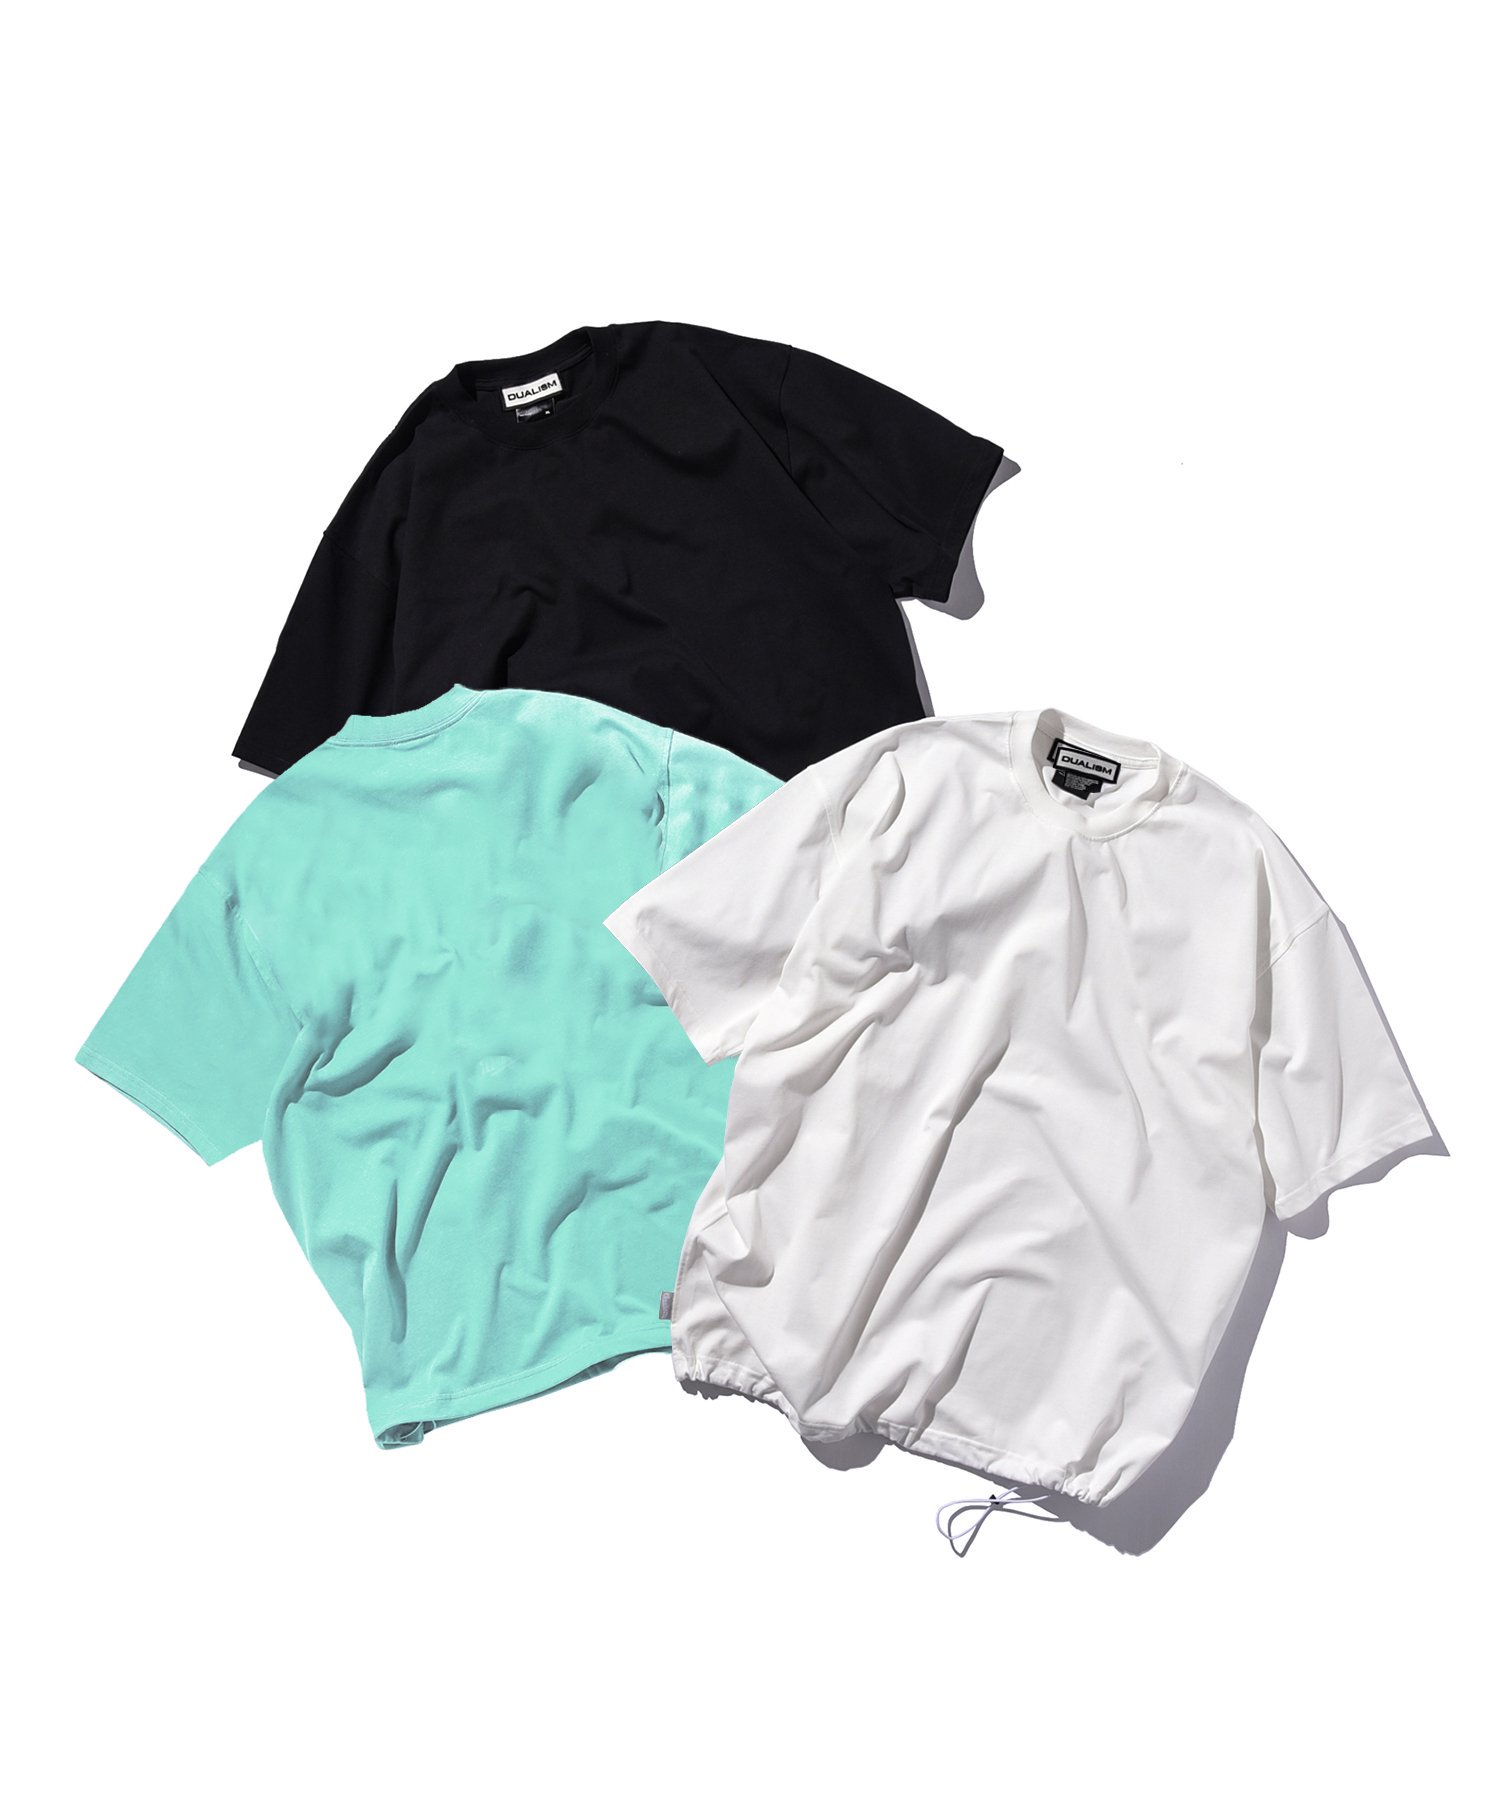 DUALISM/DLSM(デュアリズム) Tシャツ COOL TOUCH FLEX TEE 公式通販サイト | DUALISM公式通販サイト